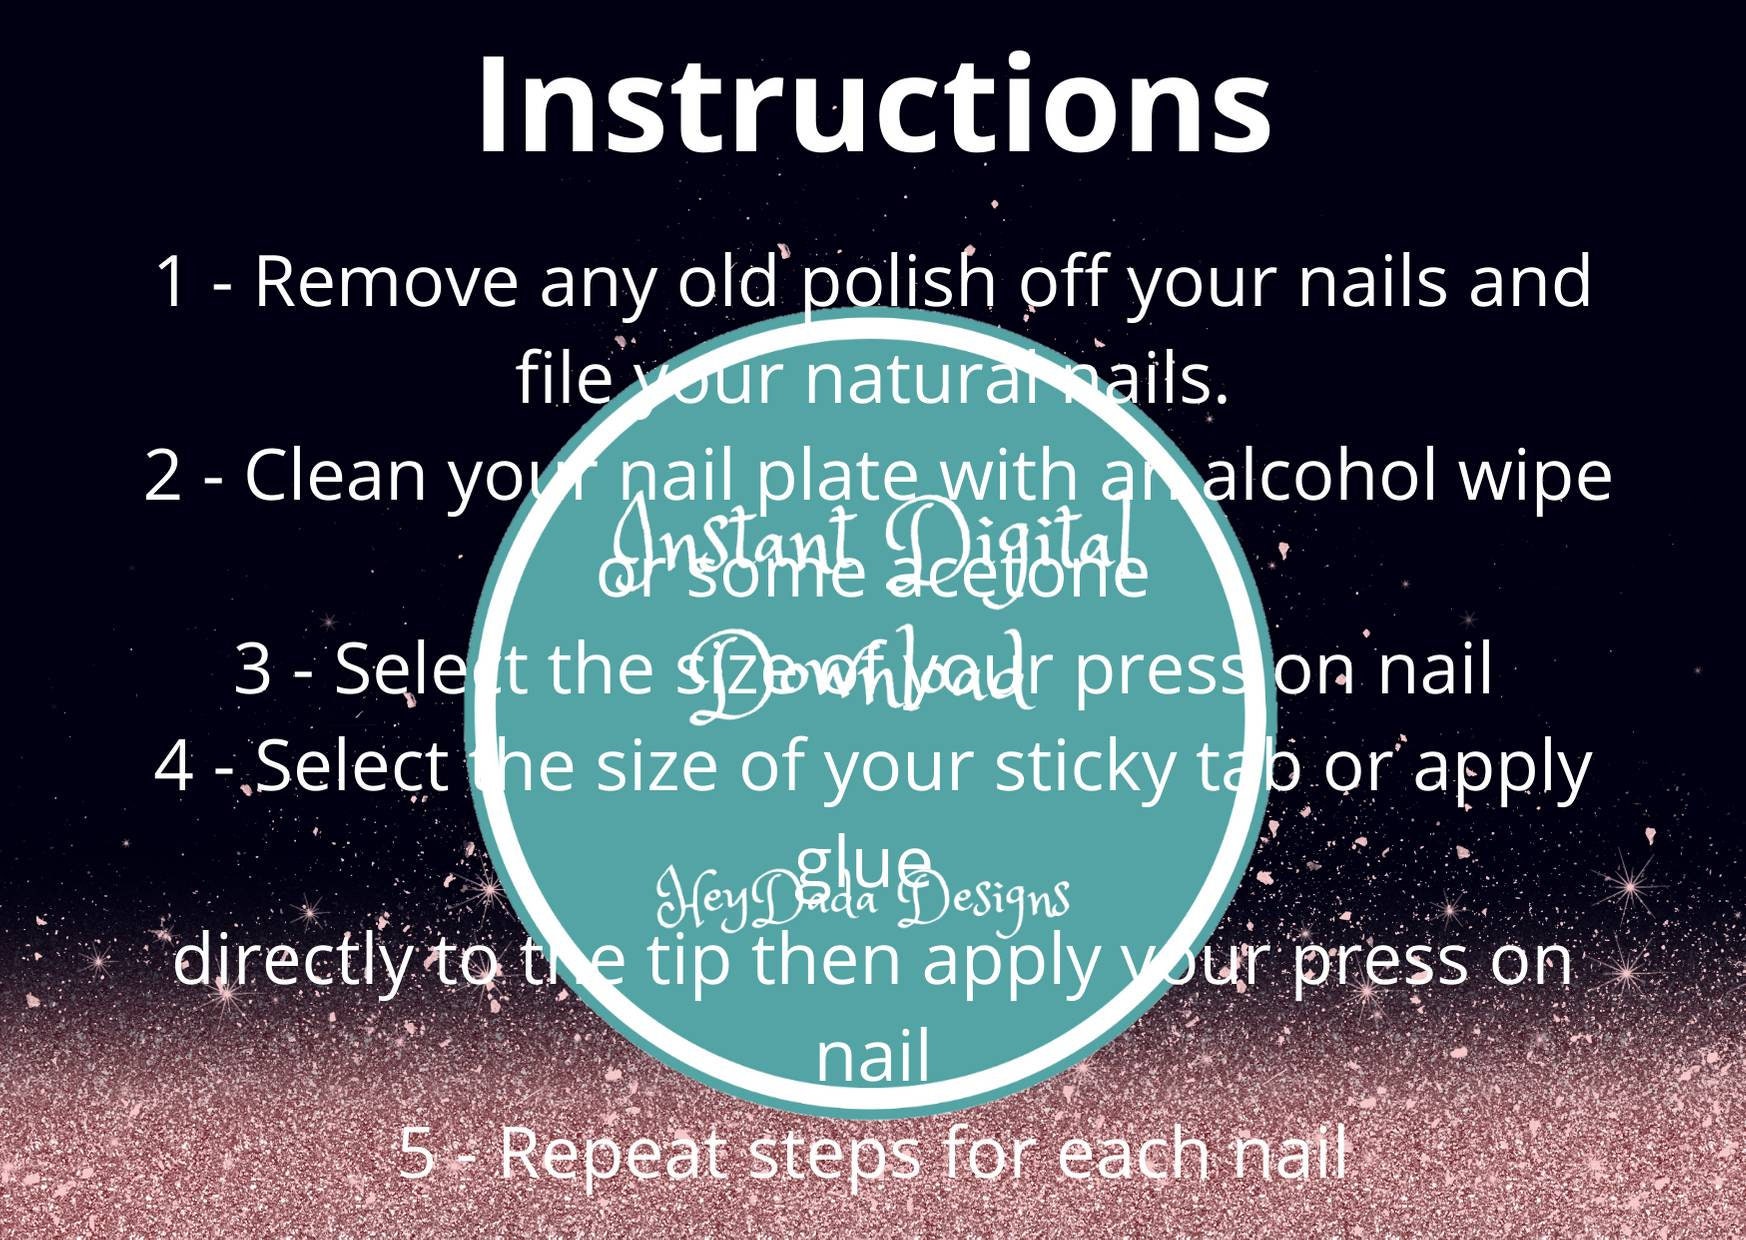 Press On Nail Instruction And Aftercare Advice Cards Digital | Etsy